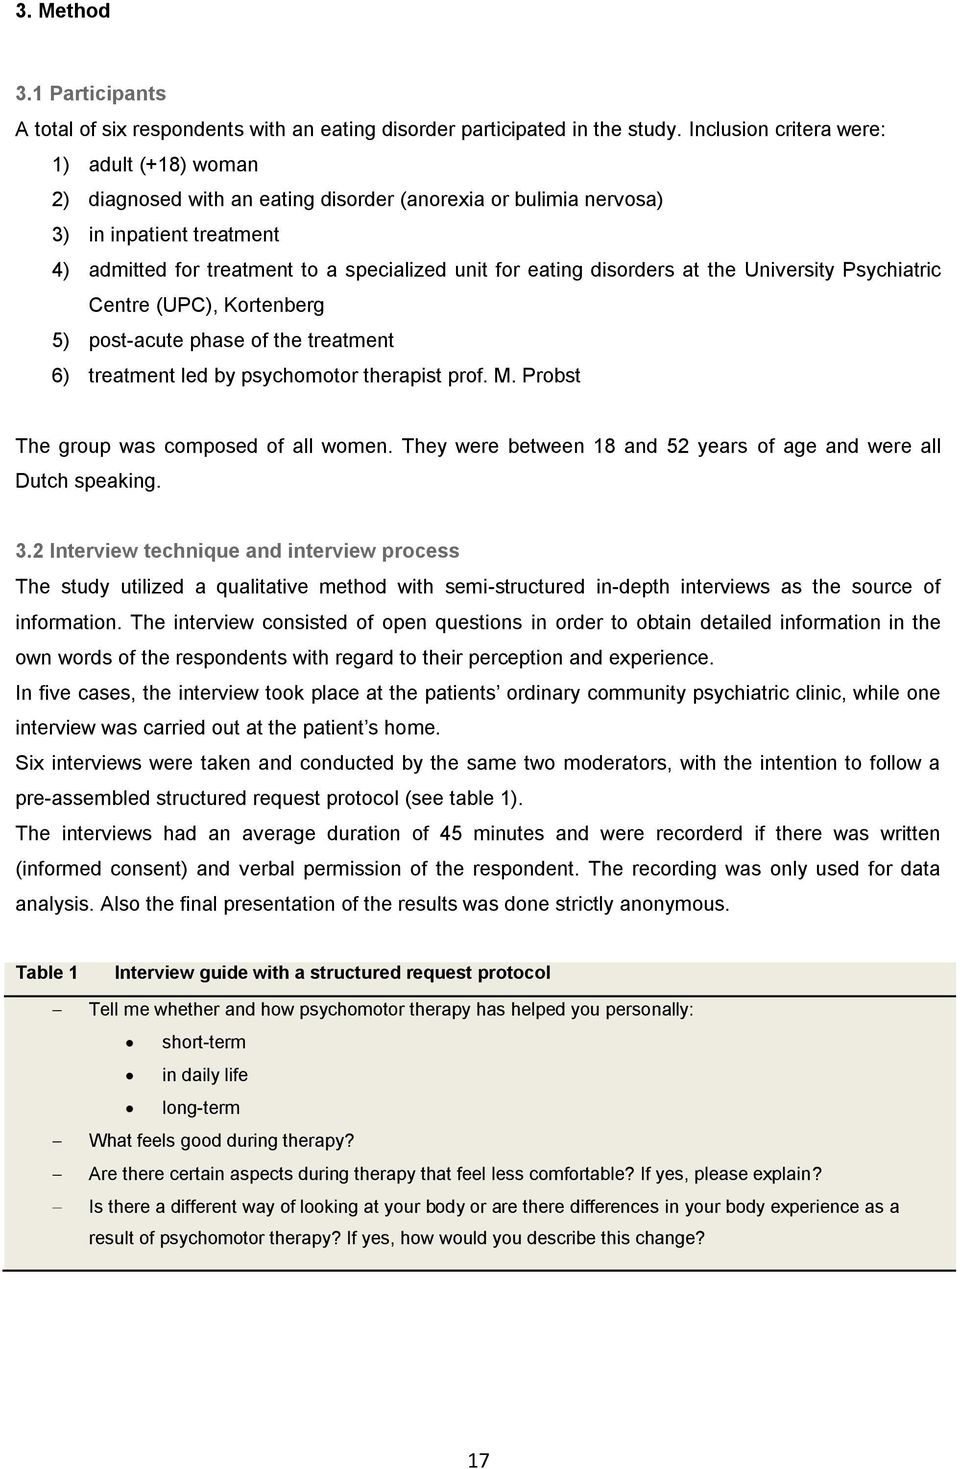 disorders at the University Psychiatric Centre (UPC), Kortenberg 5) post-acute phase of the treatment 6) treatment led by psychomotor therapist prof. M. Probst The group was composed of all women.